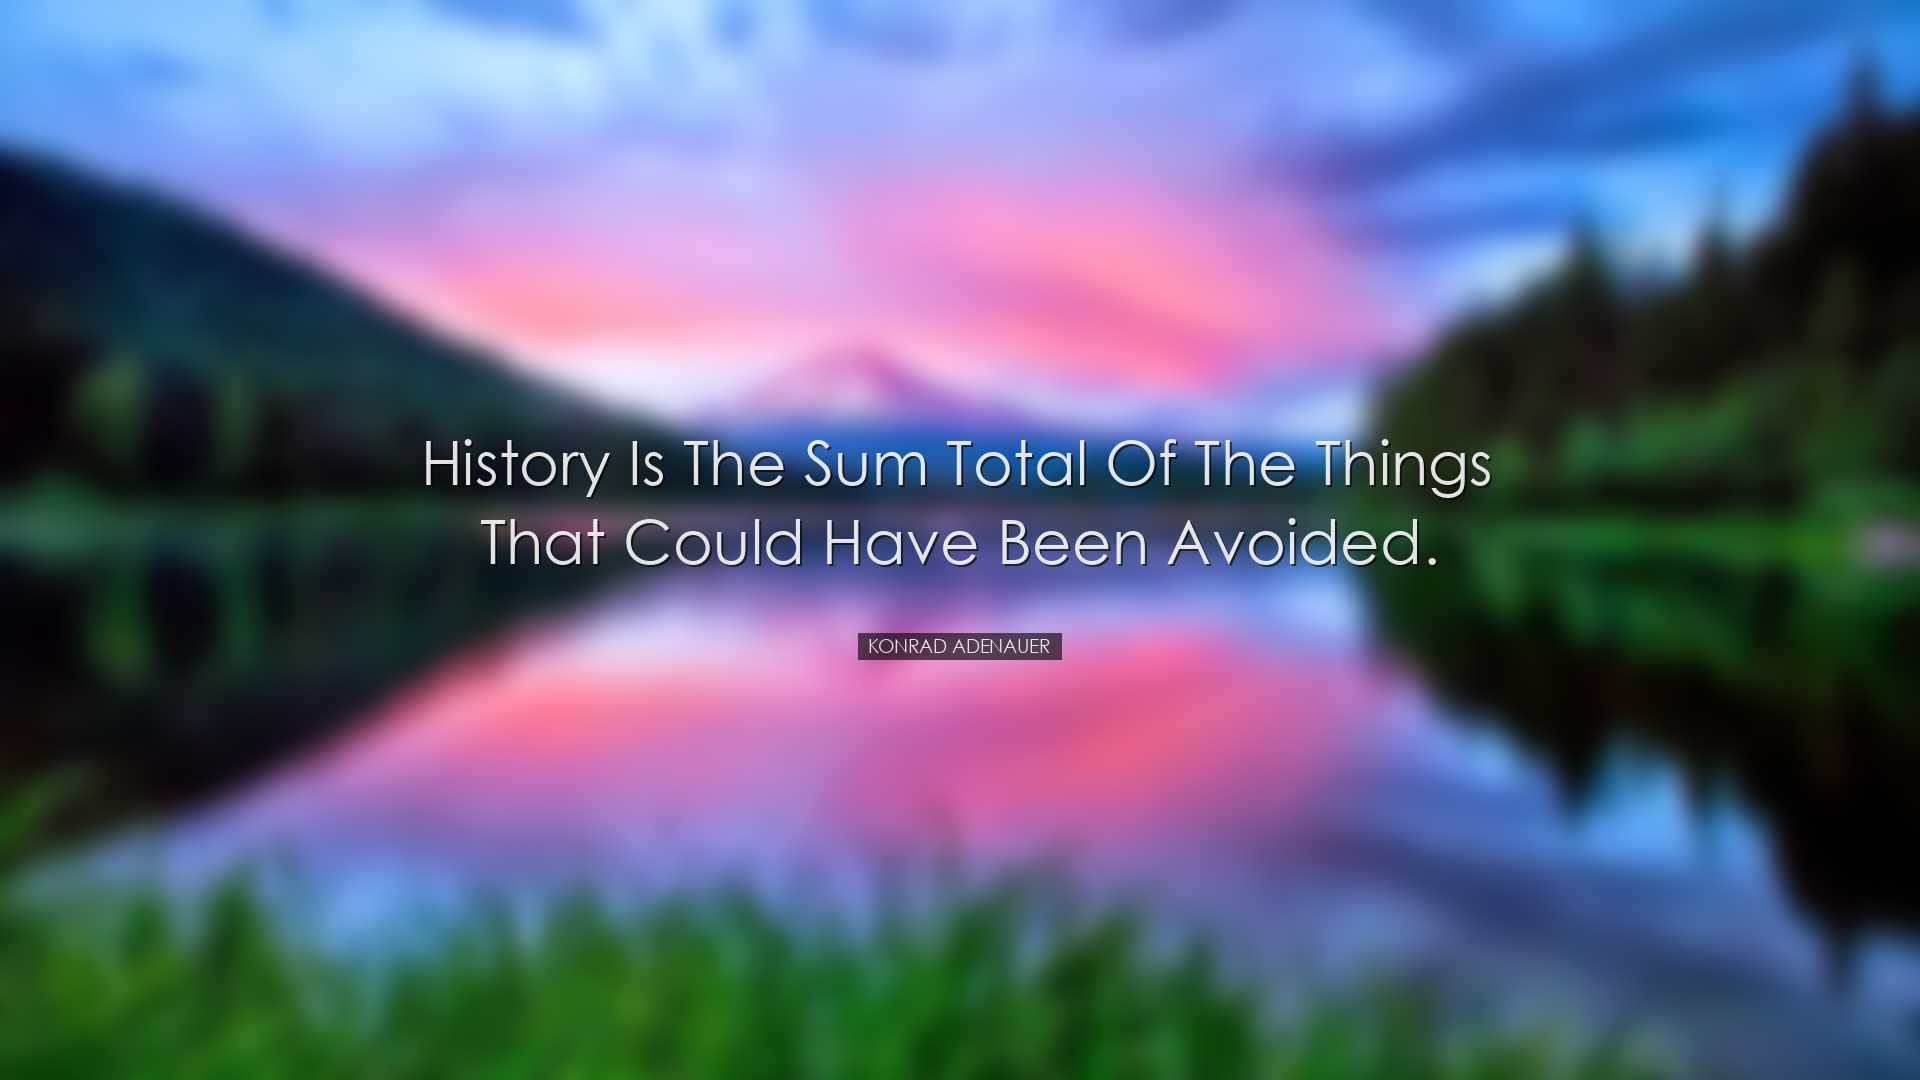 History is the sum total of the things that could have been avoide